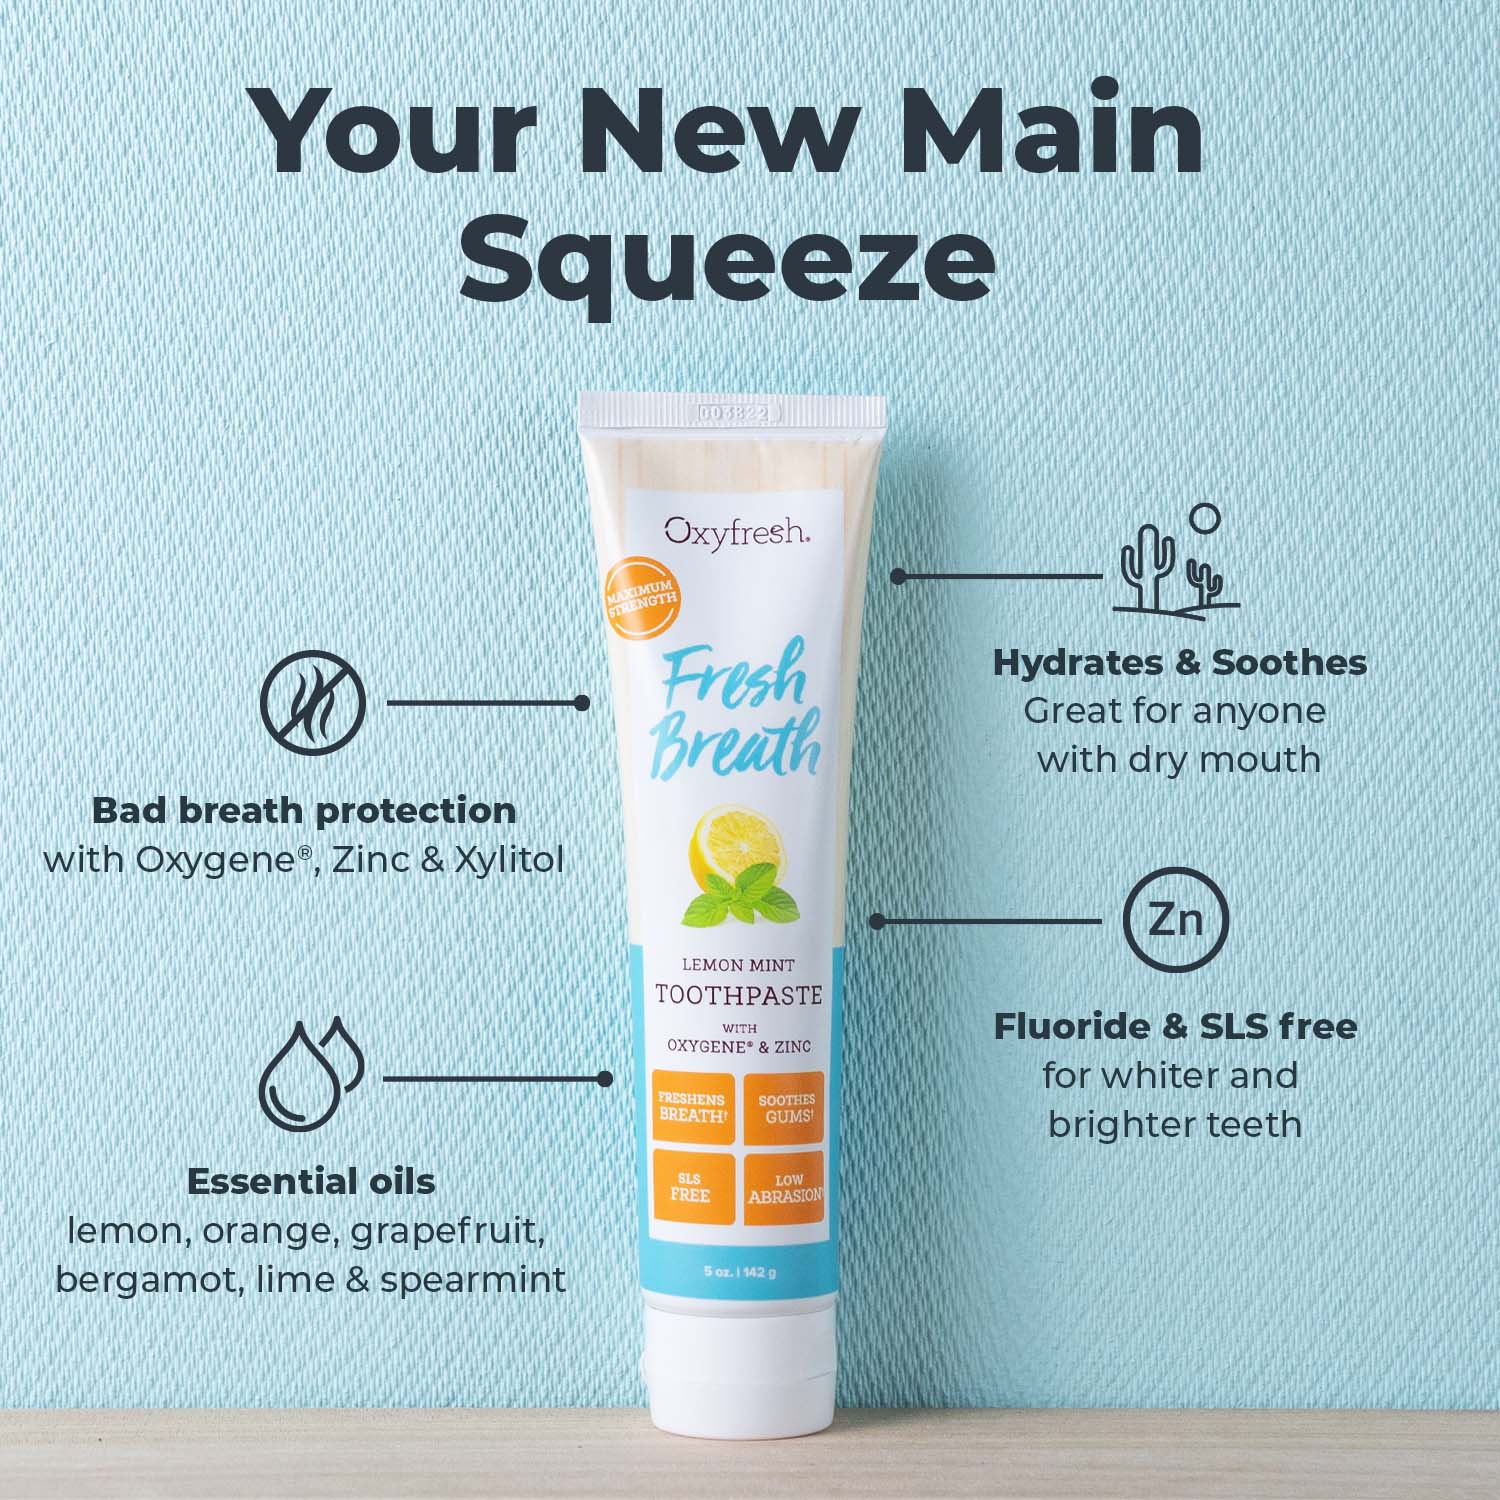 oxyfresh-lemon-mint-toothpaste-with-bad-breath-protection-hydrates-and-soothes-fluoride-and-sls-free-and-essential-oils